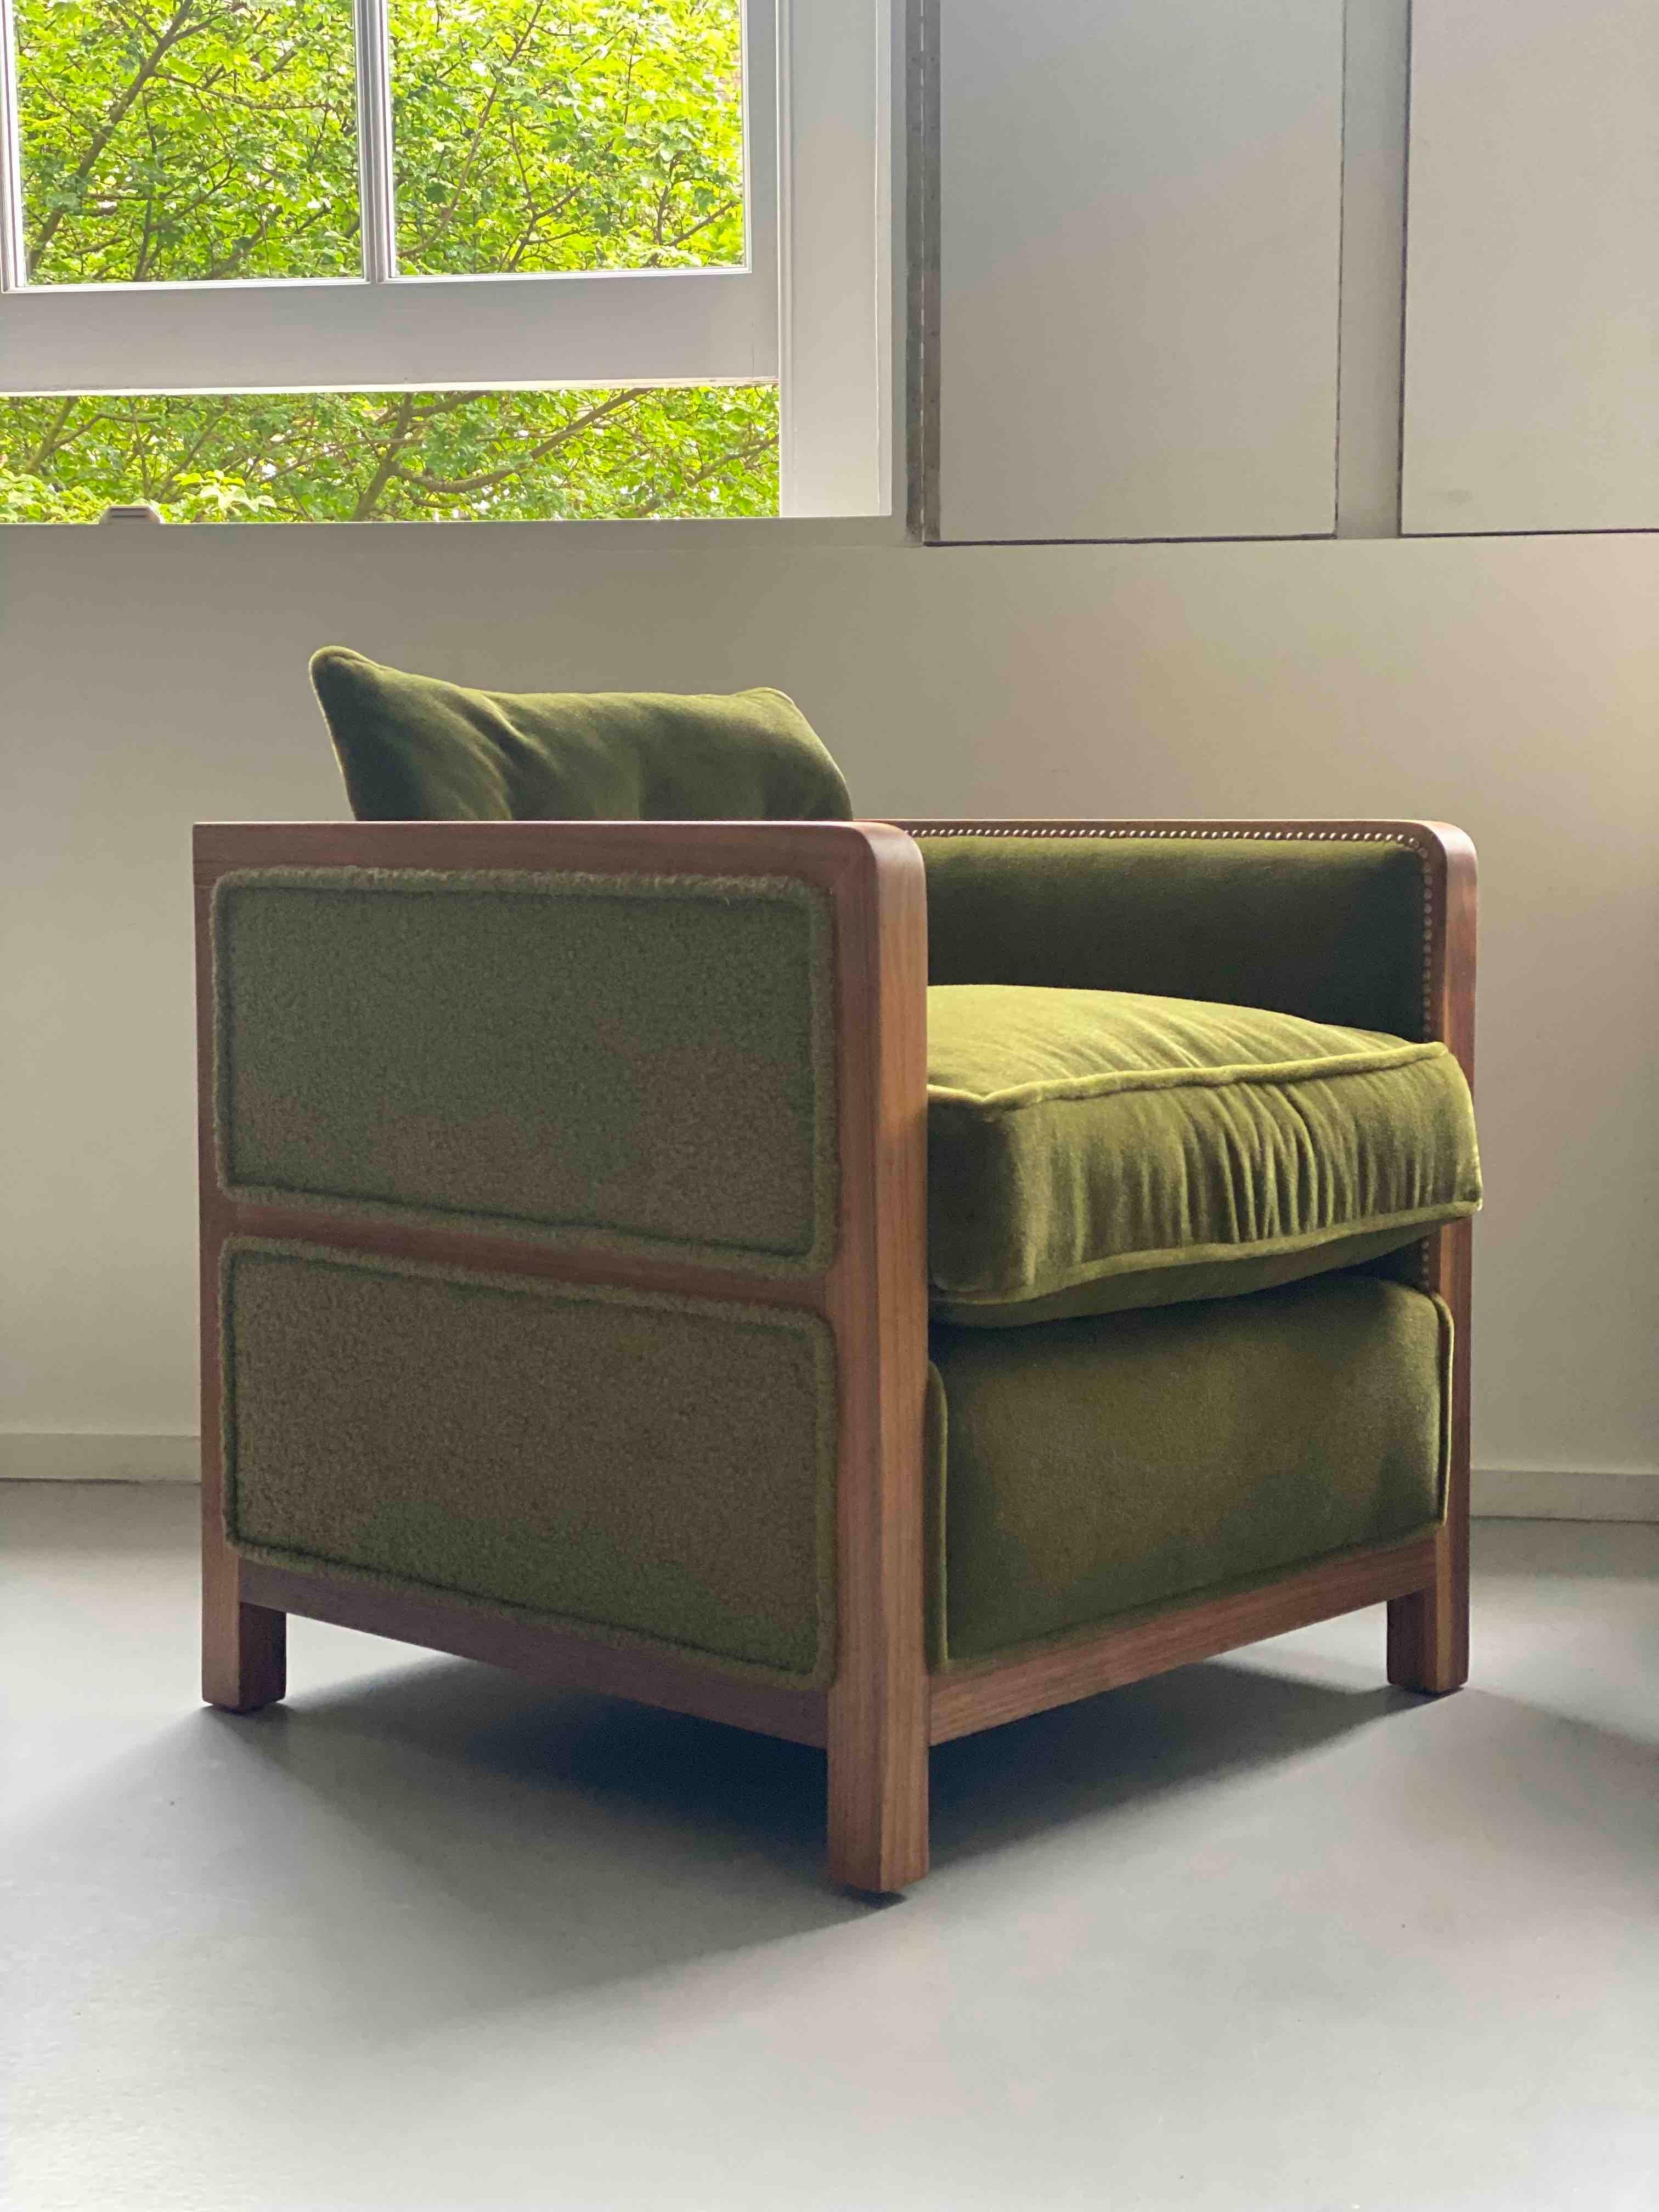 Utterly lounge worthy, the Bacco armchair design is a contemporary remodel of the iconic boxy chair.

Pushing the boundaries in design and playing around with different textures and finishes, the deconstructed Boxy Bacco armchair blends matte with